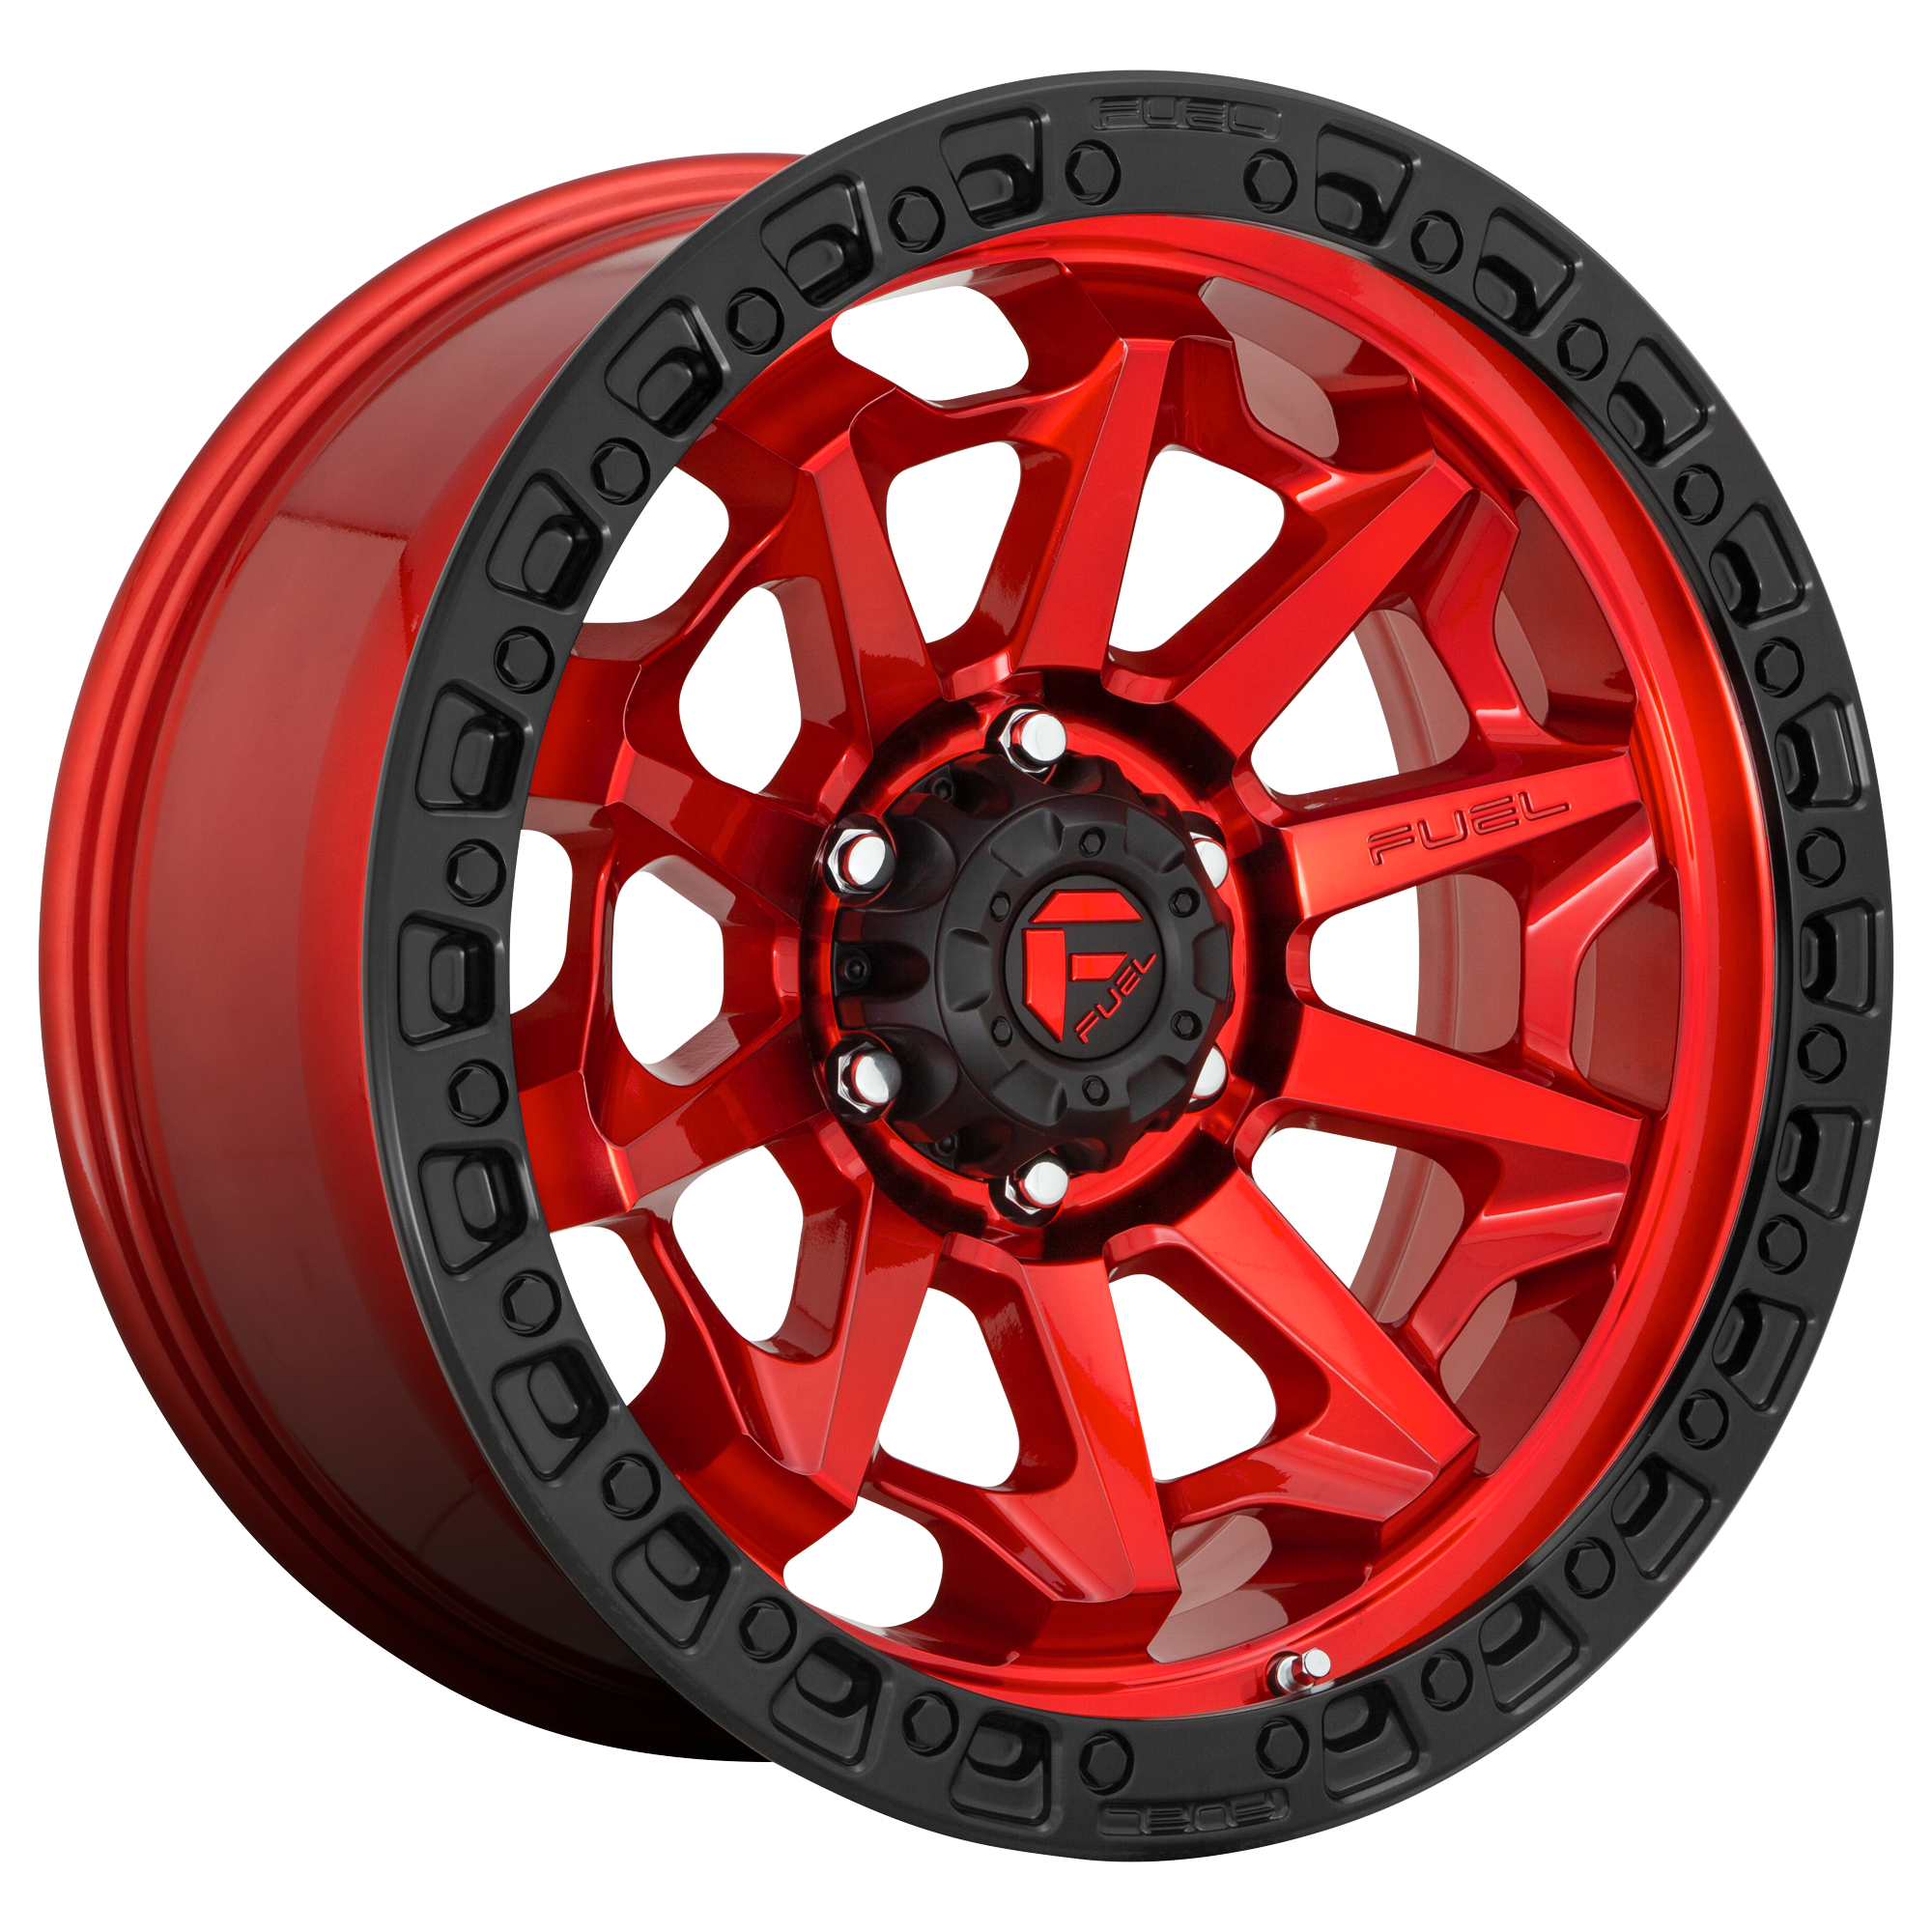 COVERT 20x10 8x165.10 CANDY RED BLACK BEAD RING (-18 mm) - Tires and Engine Performance